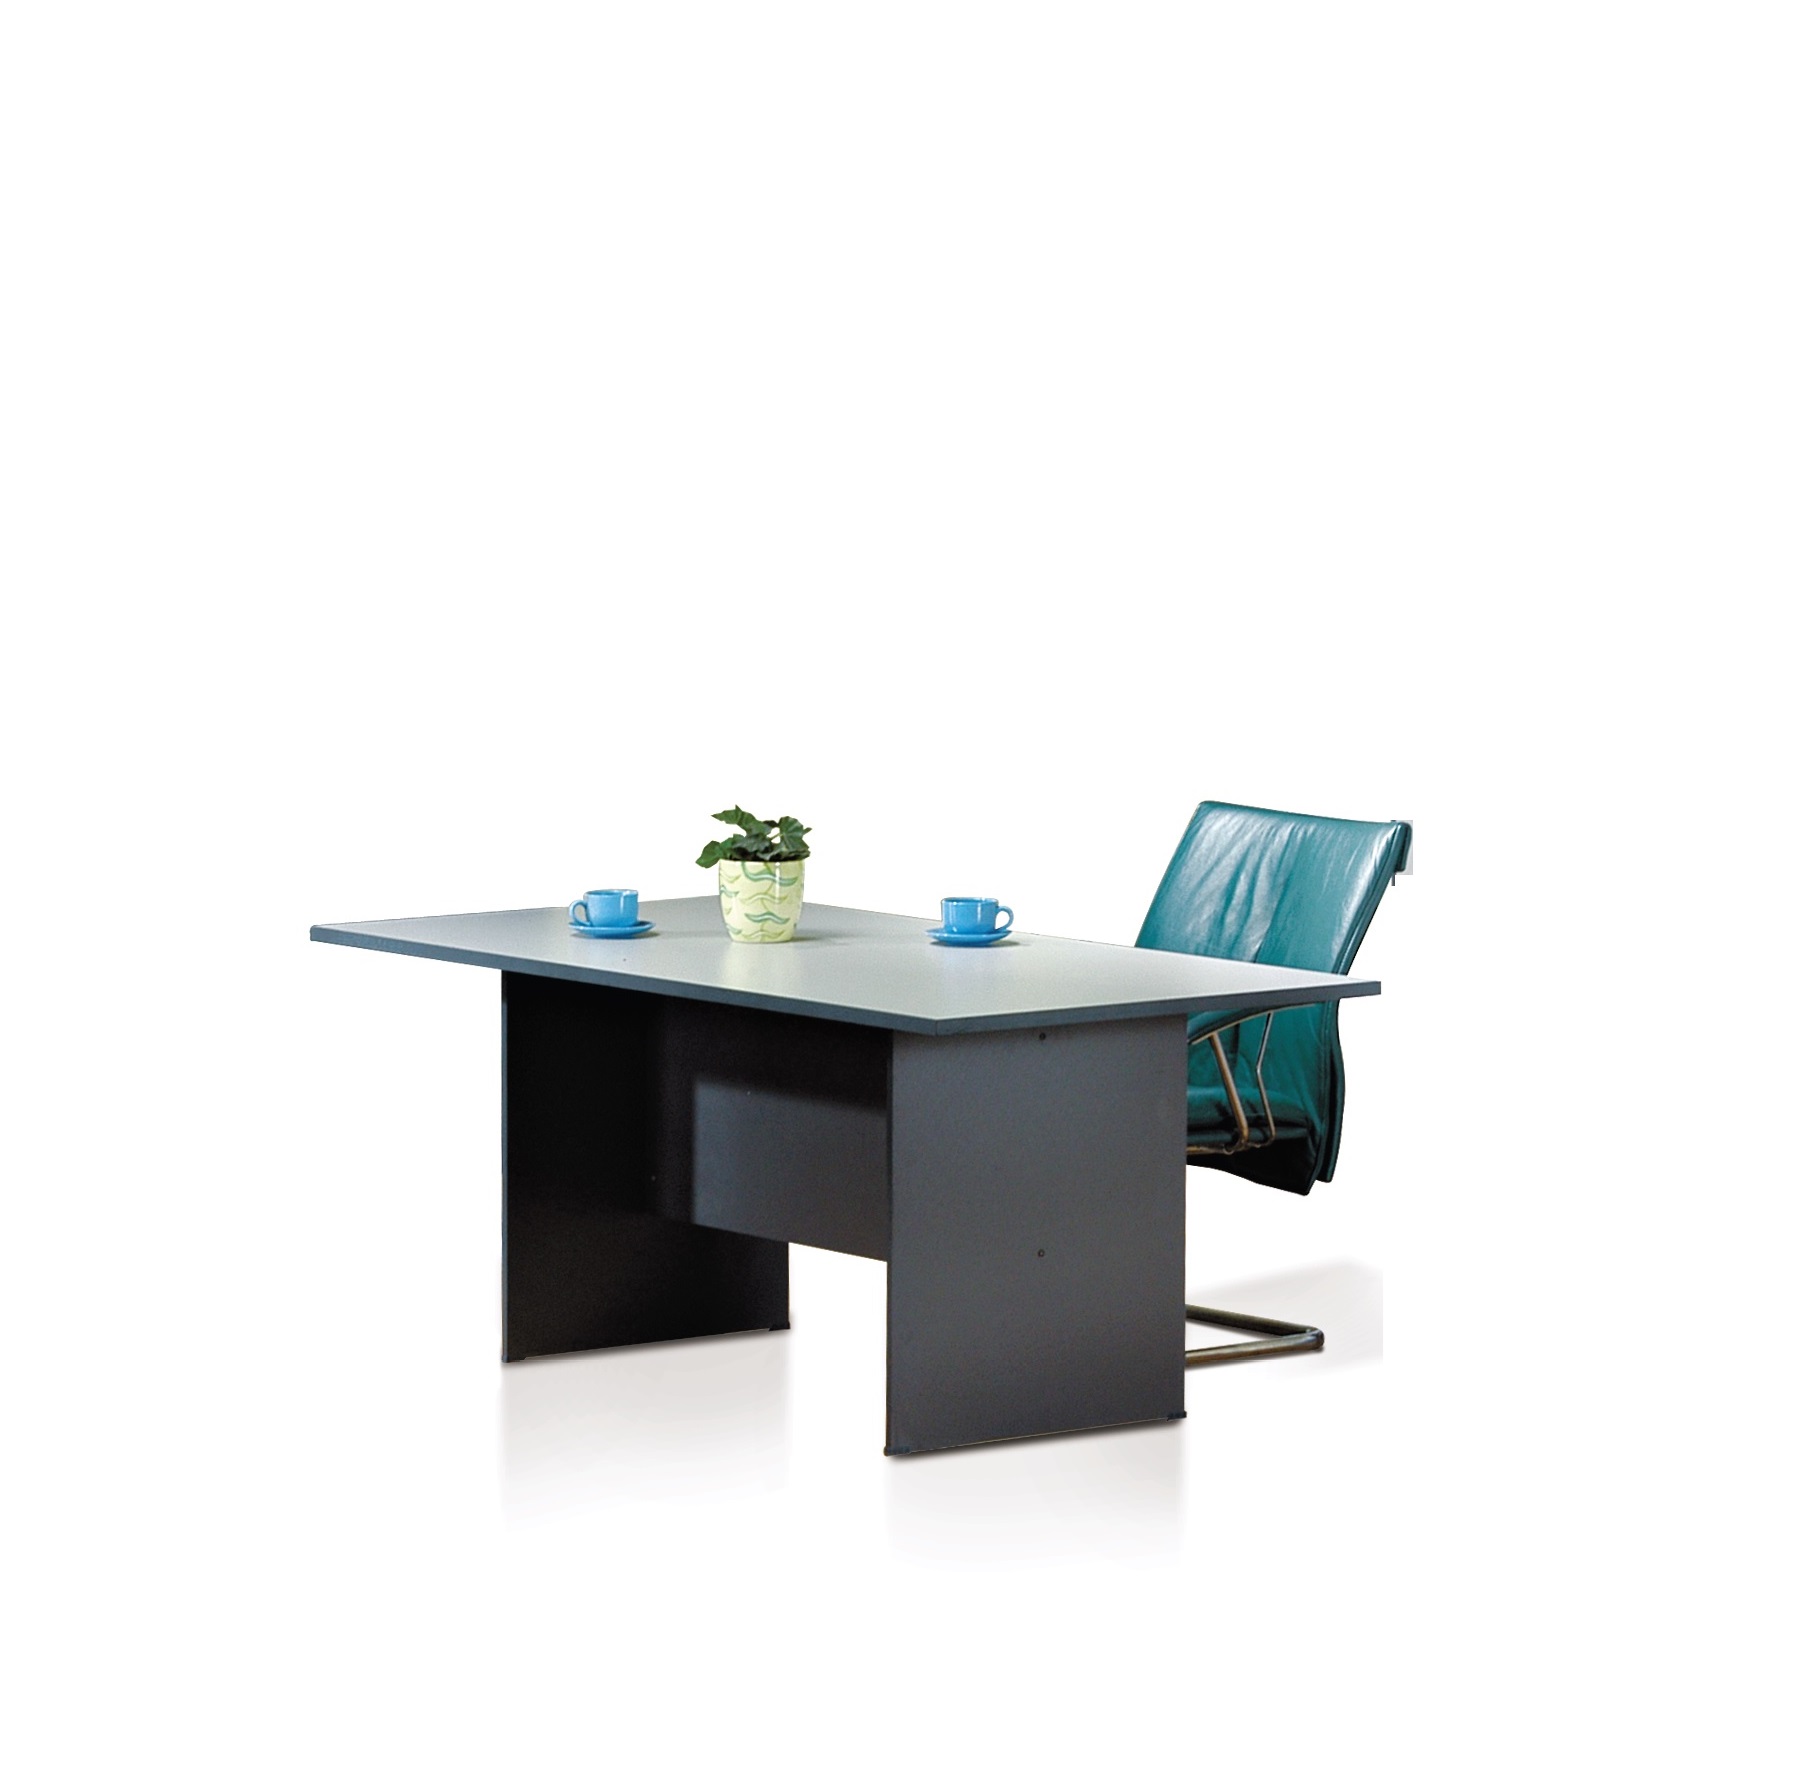 Nistra Conference Table